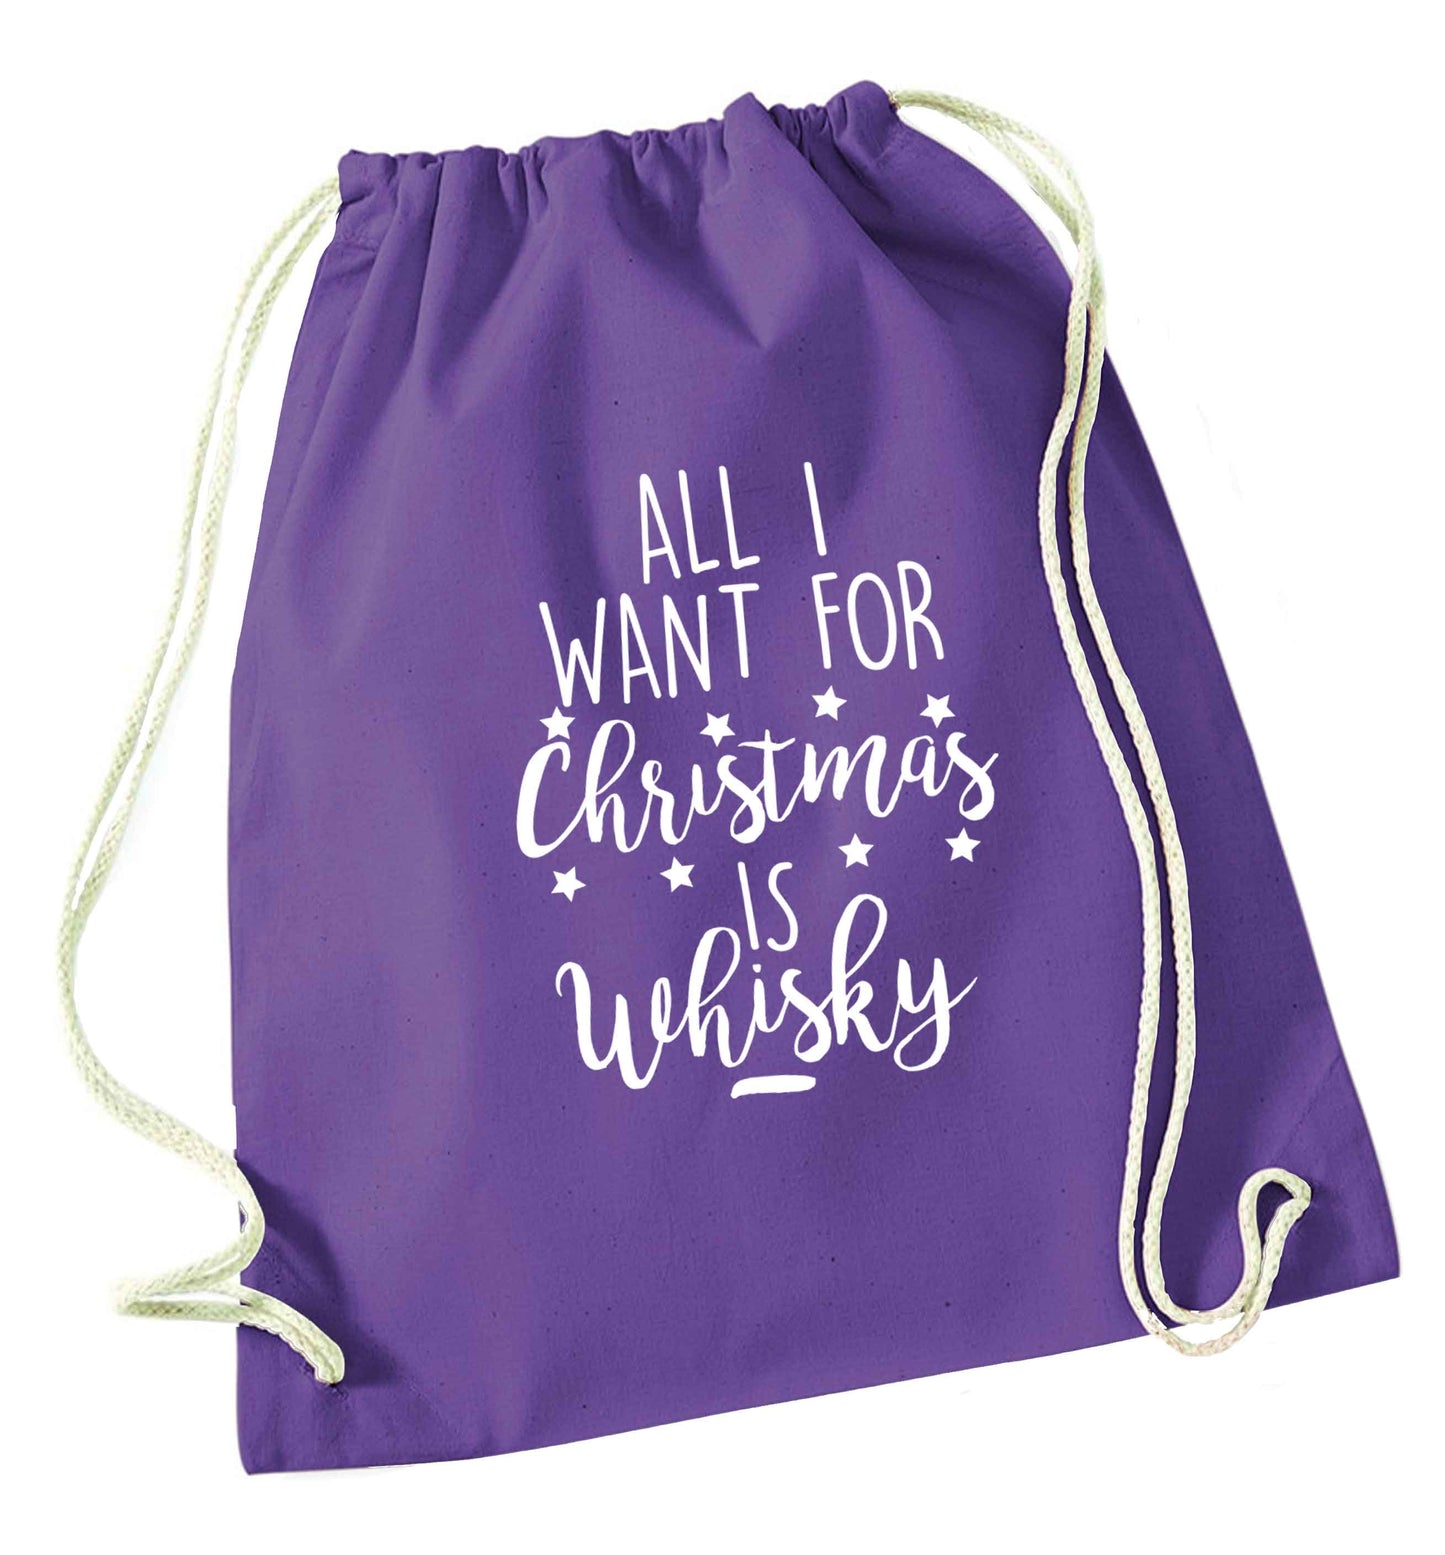 All I want for Christmas is whisky purple drawstring bag